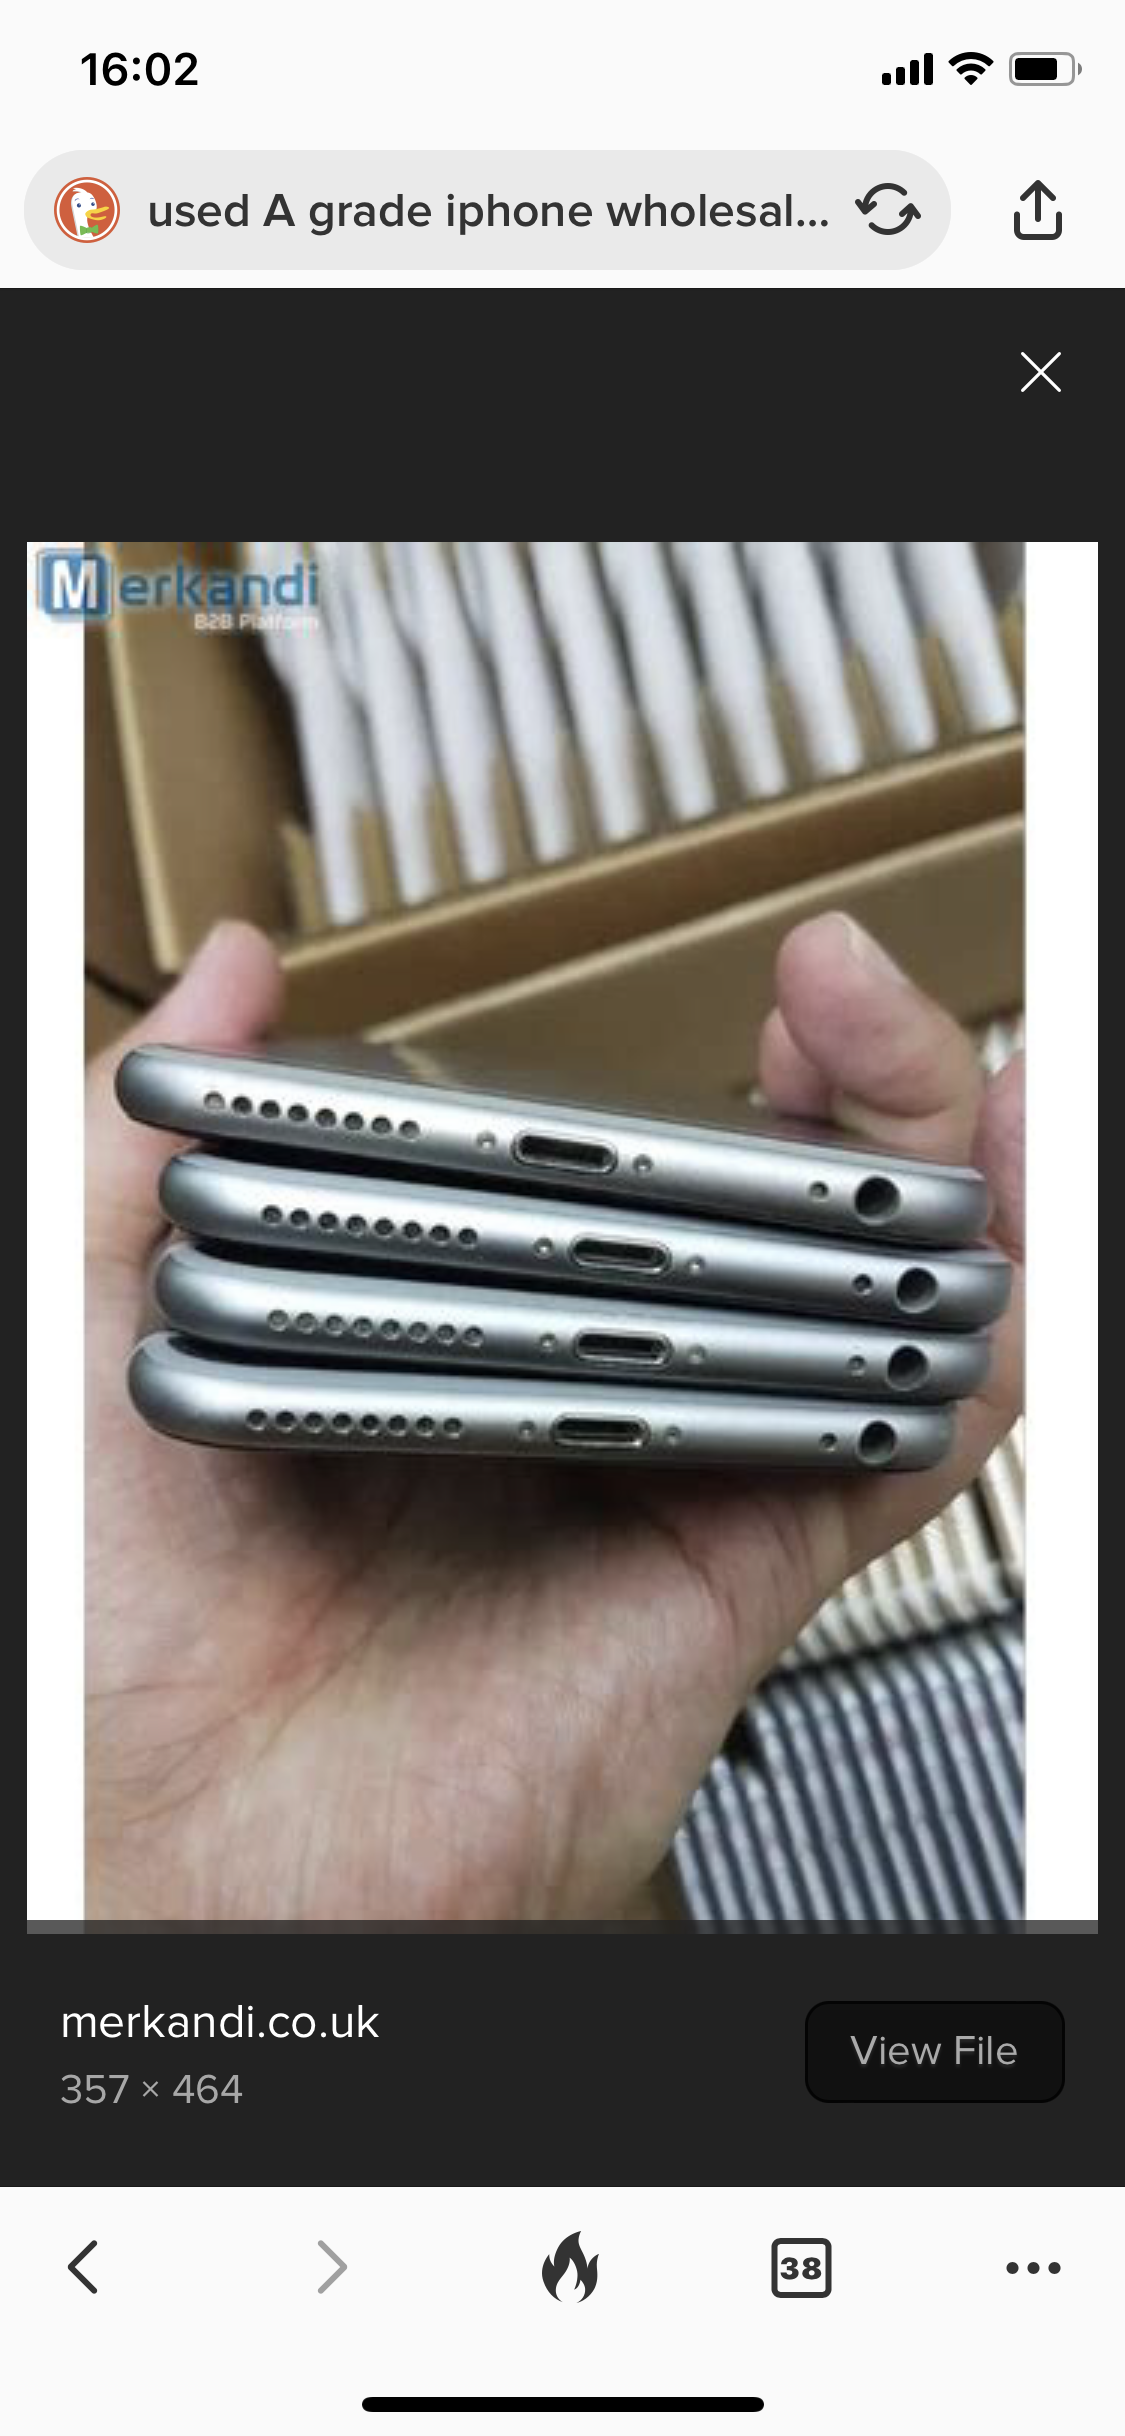 Wholesale used a grade refurbished iphone used cell phone ready to ship